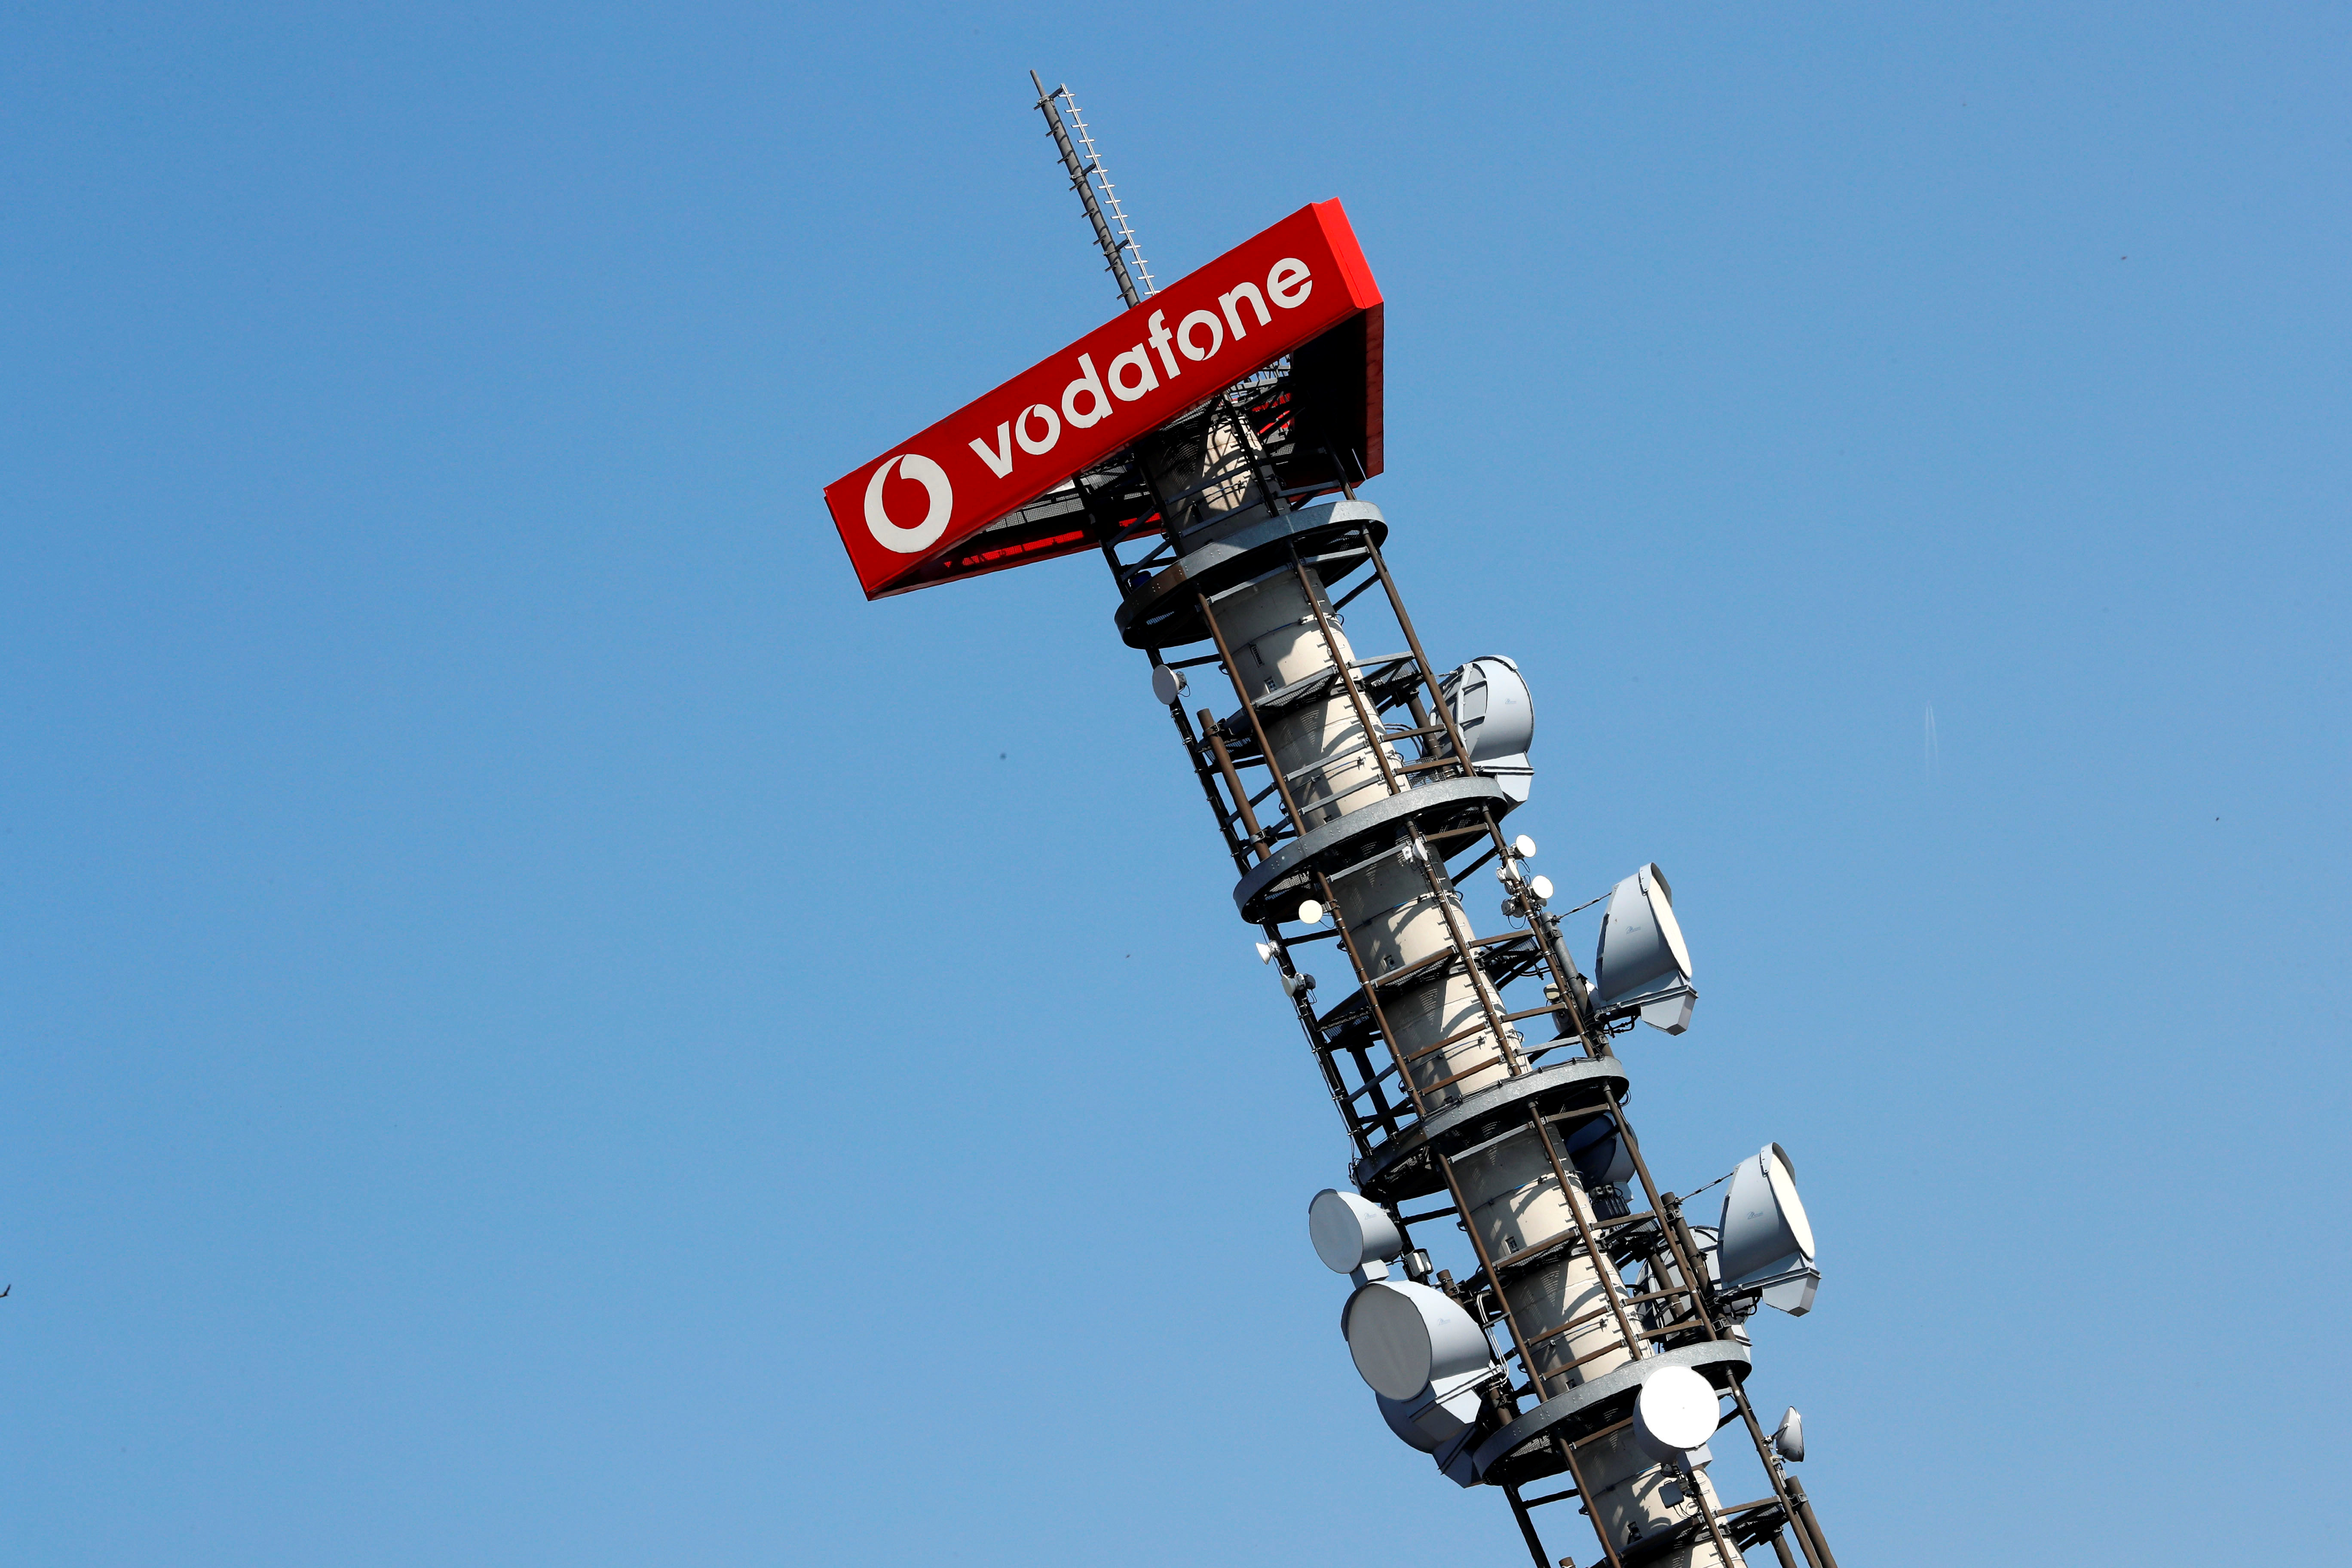 Different types of 4G, 5G and data radio relay antennas for mobile phone networks are pictured on a relay mast operated by Vodafone in Berlin